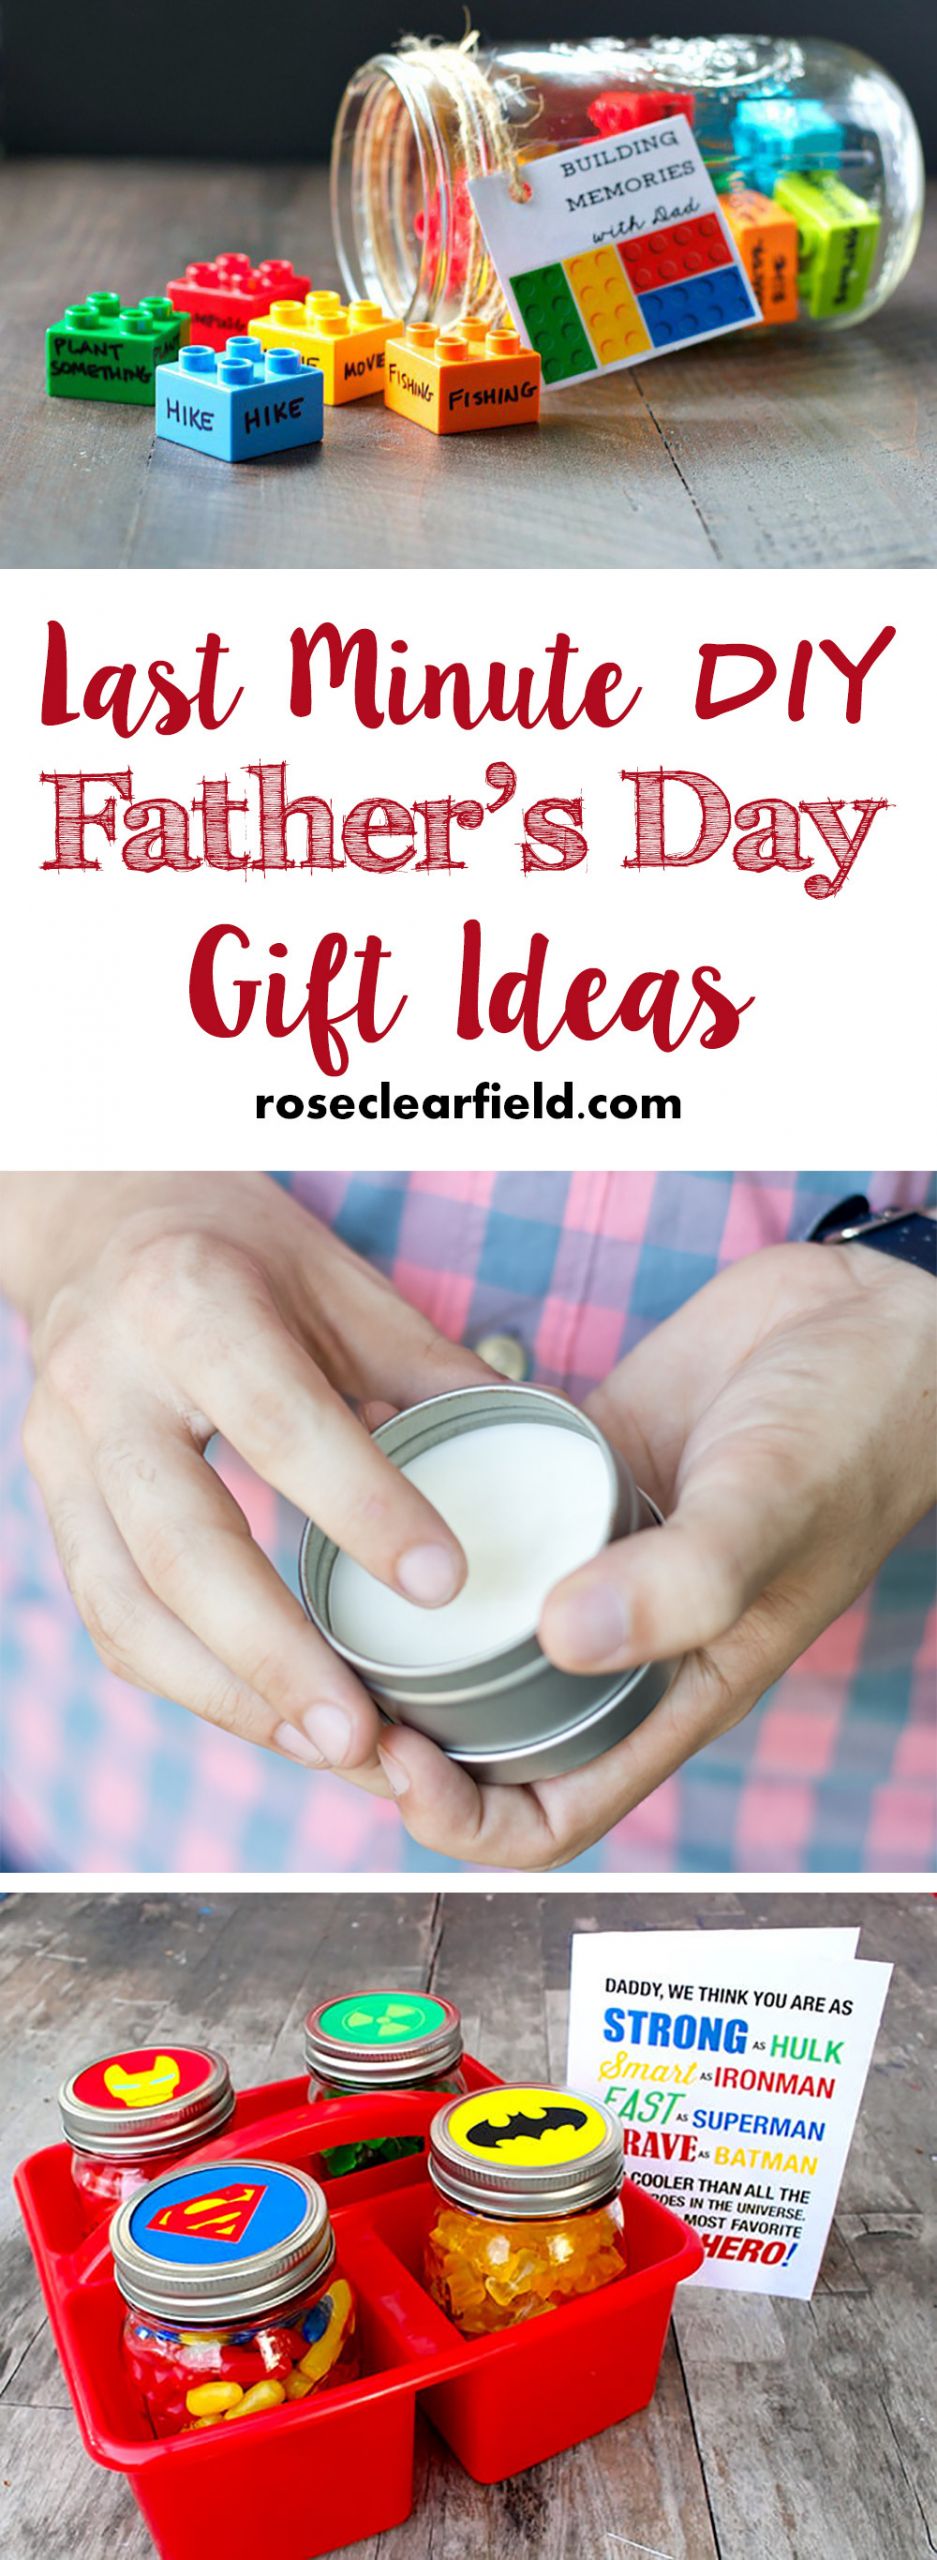 Fathersday Gift Ideas
 Last Minute DIY Father s Day Gift Ideas • Rose Clearfield